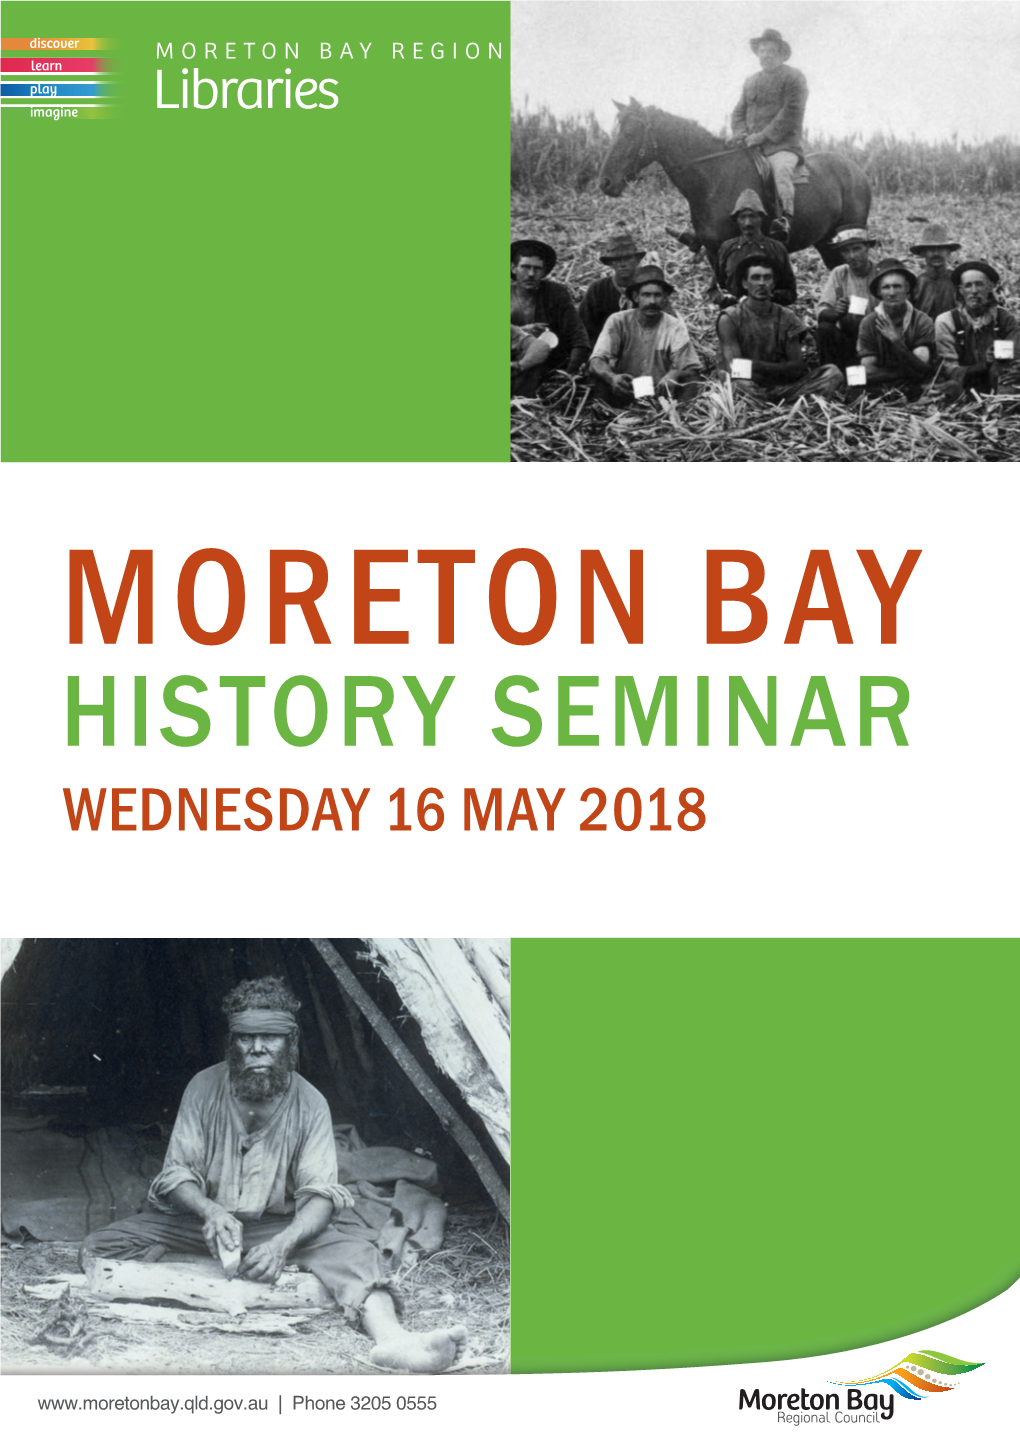 MORETON BAY HISTORY SEMINAR WEDNESDAY 16 MAY 2018 Uncover the History of Our Region, with Four Eminent Historians Exploring Key People and Events